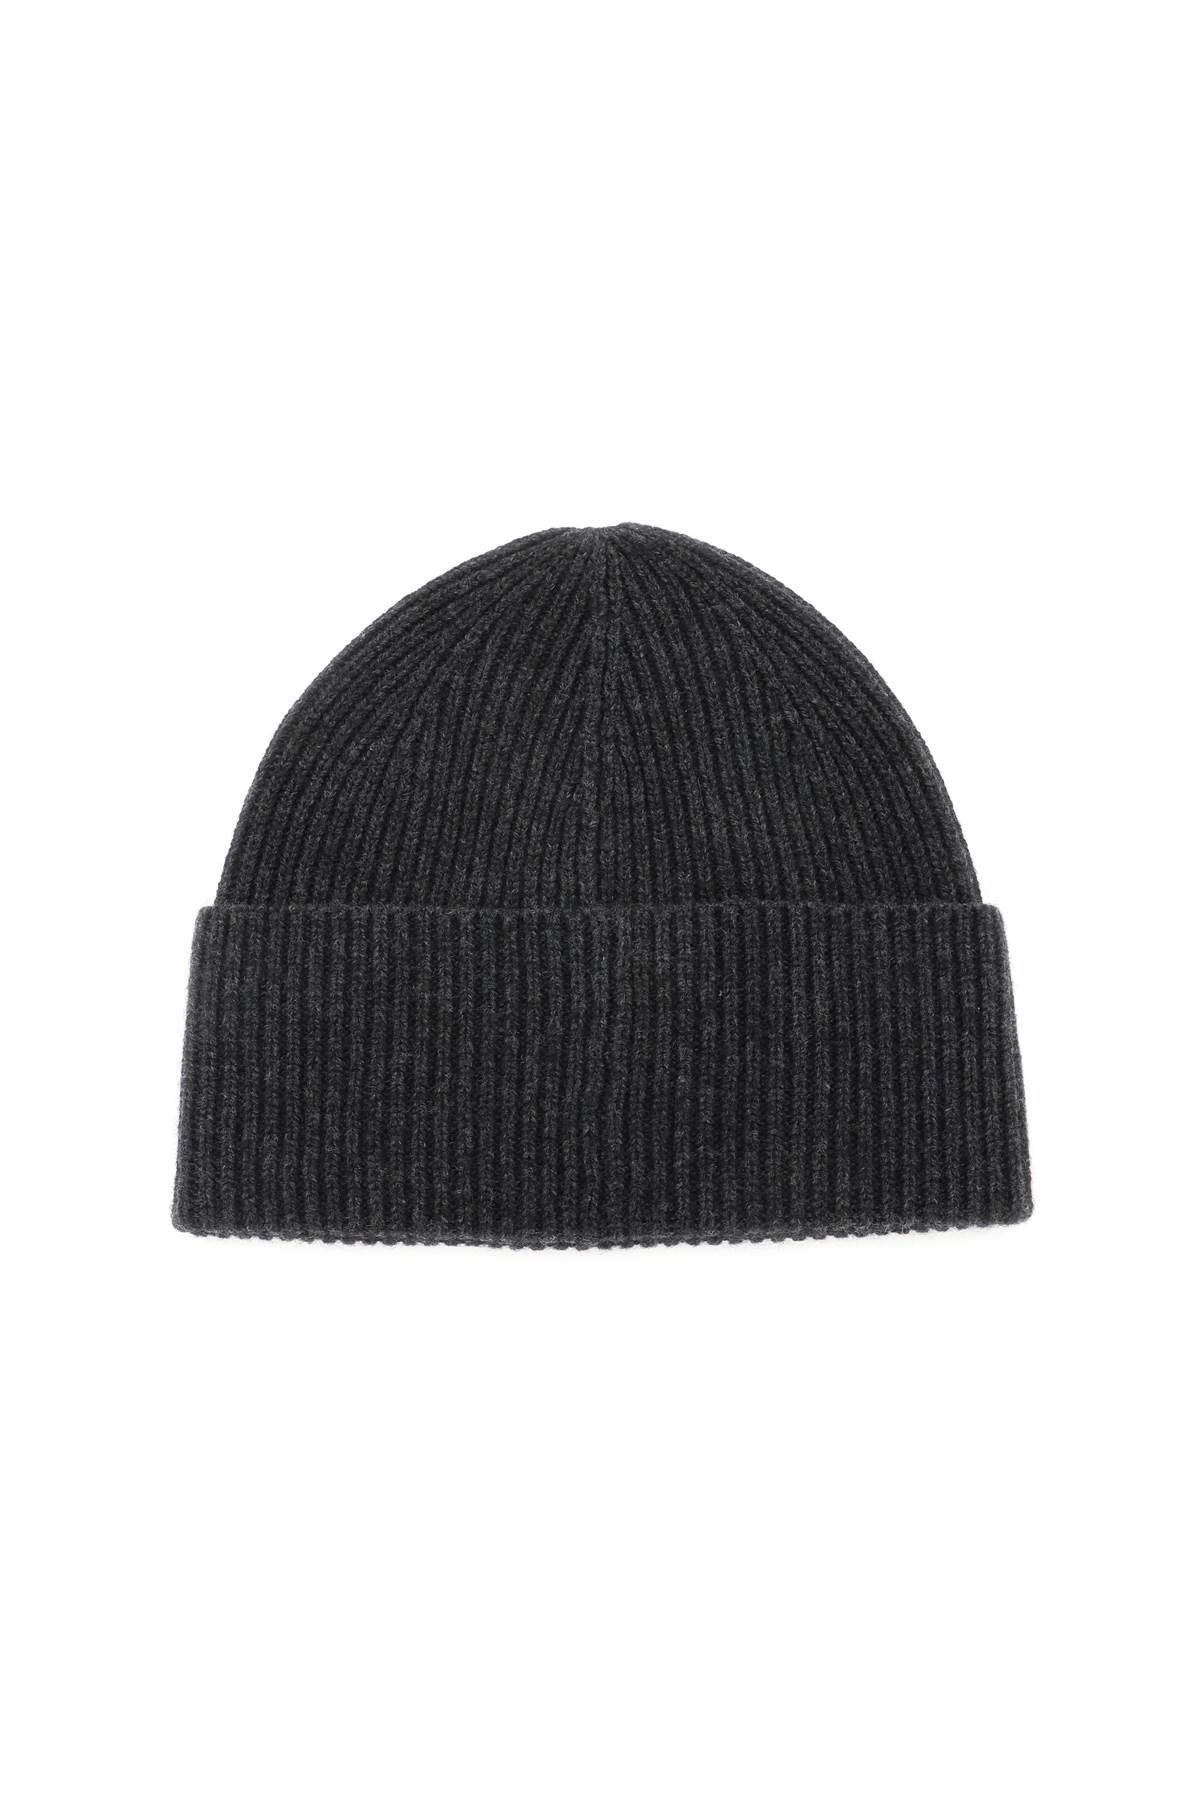 Toteme wool cashmere knit beanie